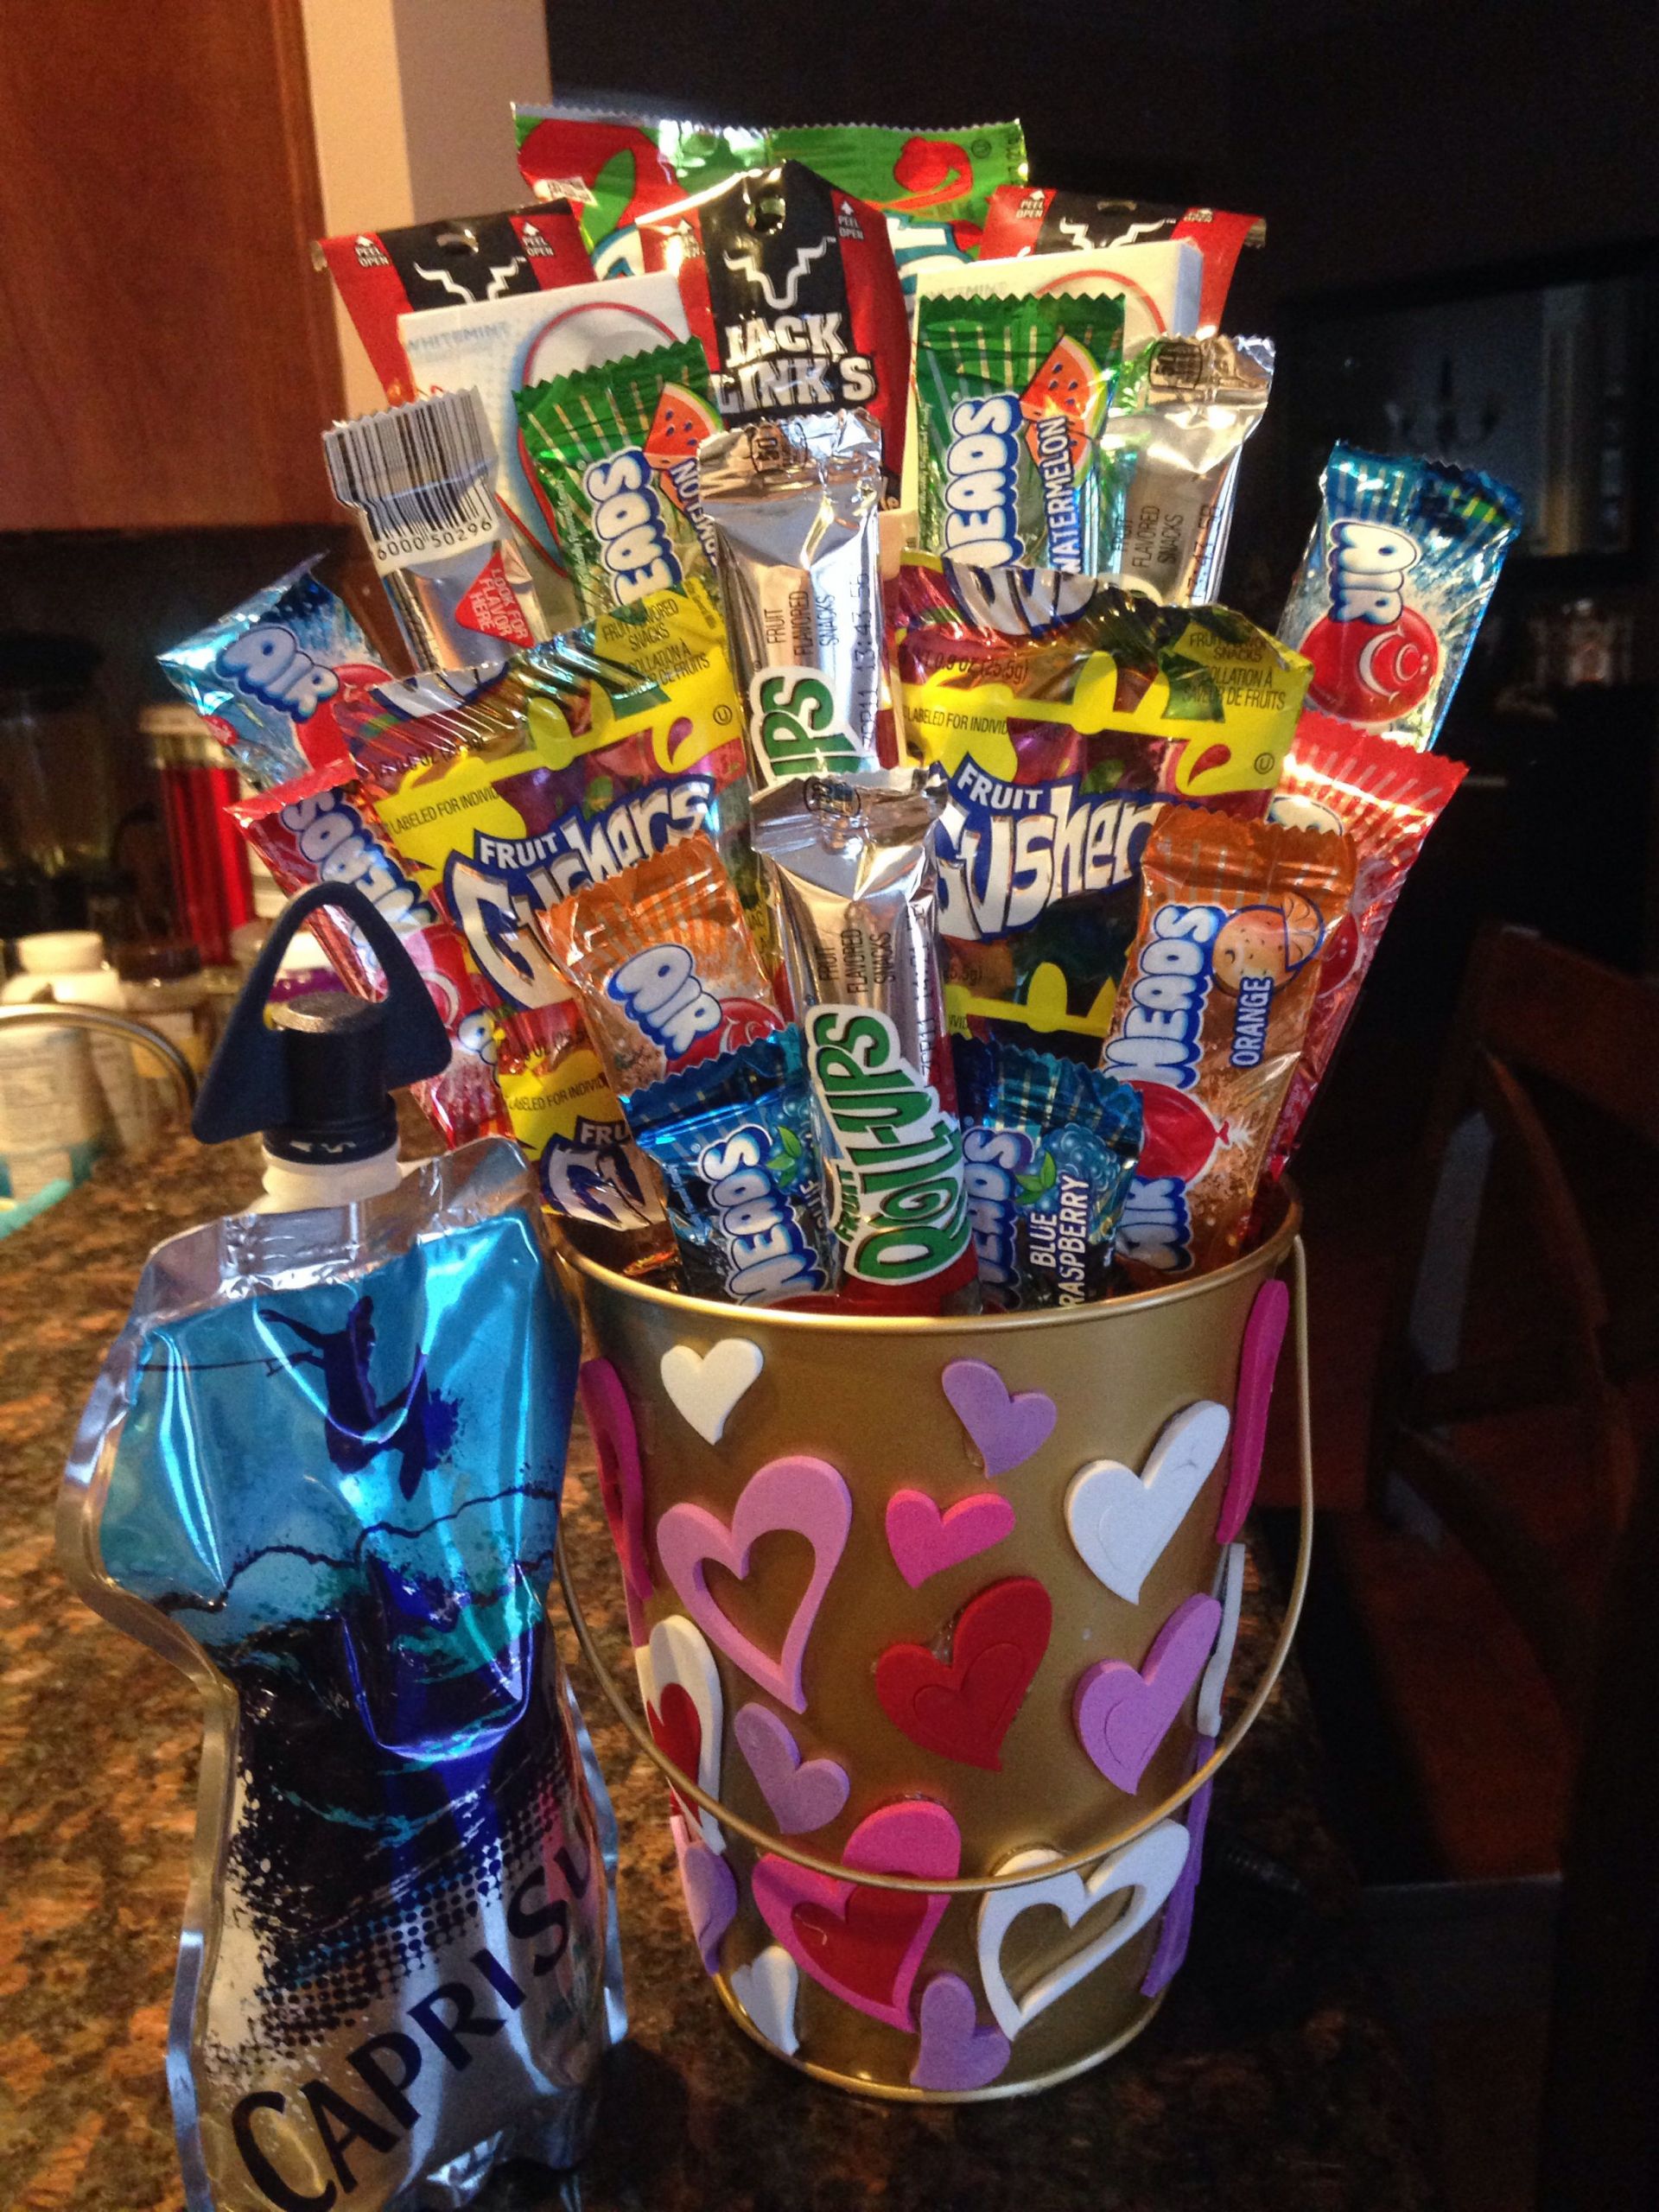 Candy Gift Baskets For Valentines Day
 My boyfriends candy basket for valentines day ️